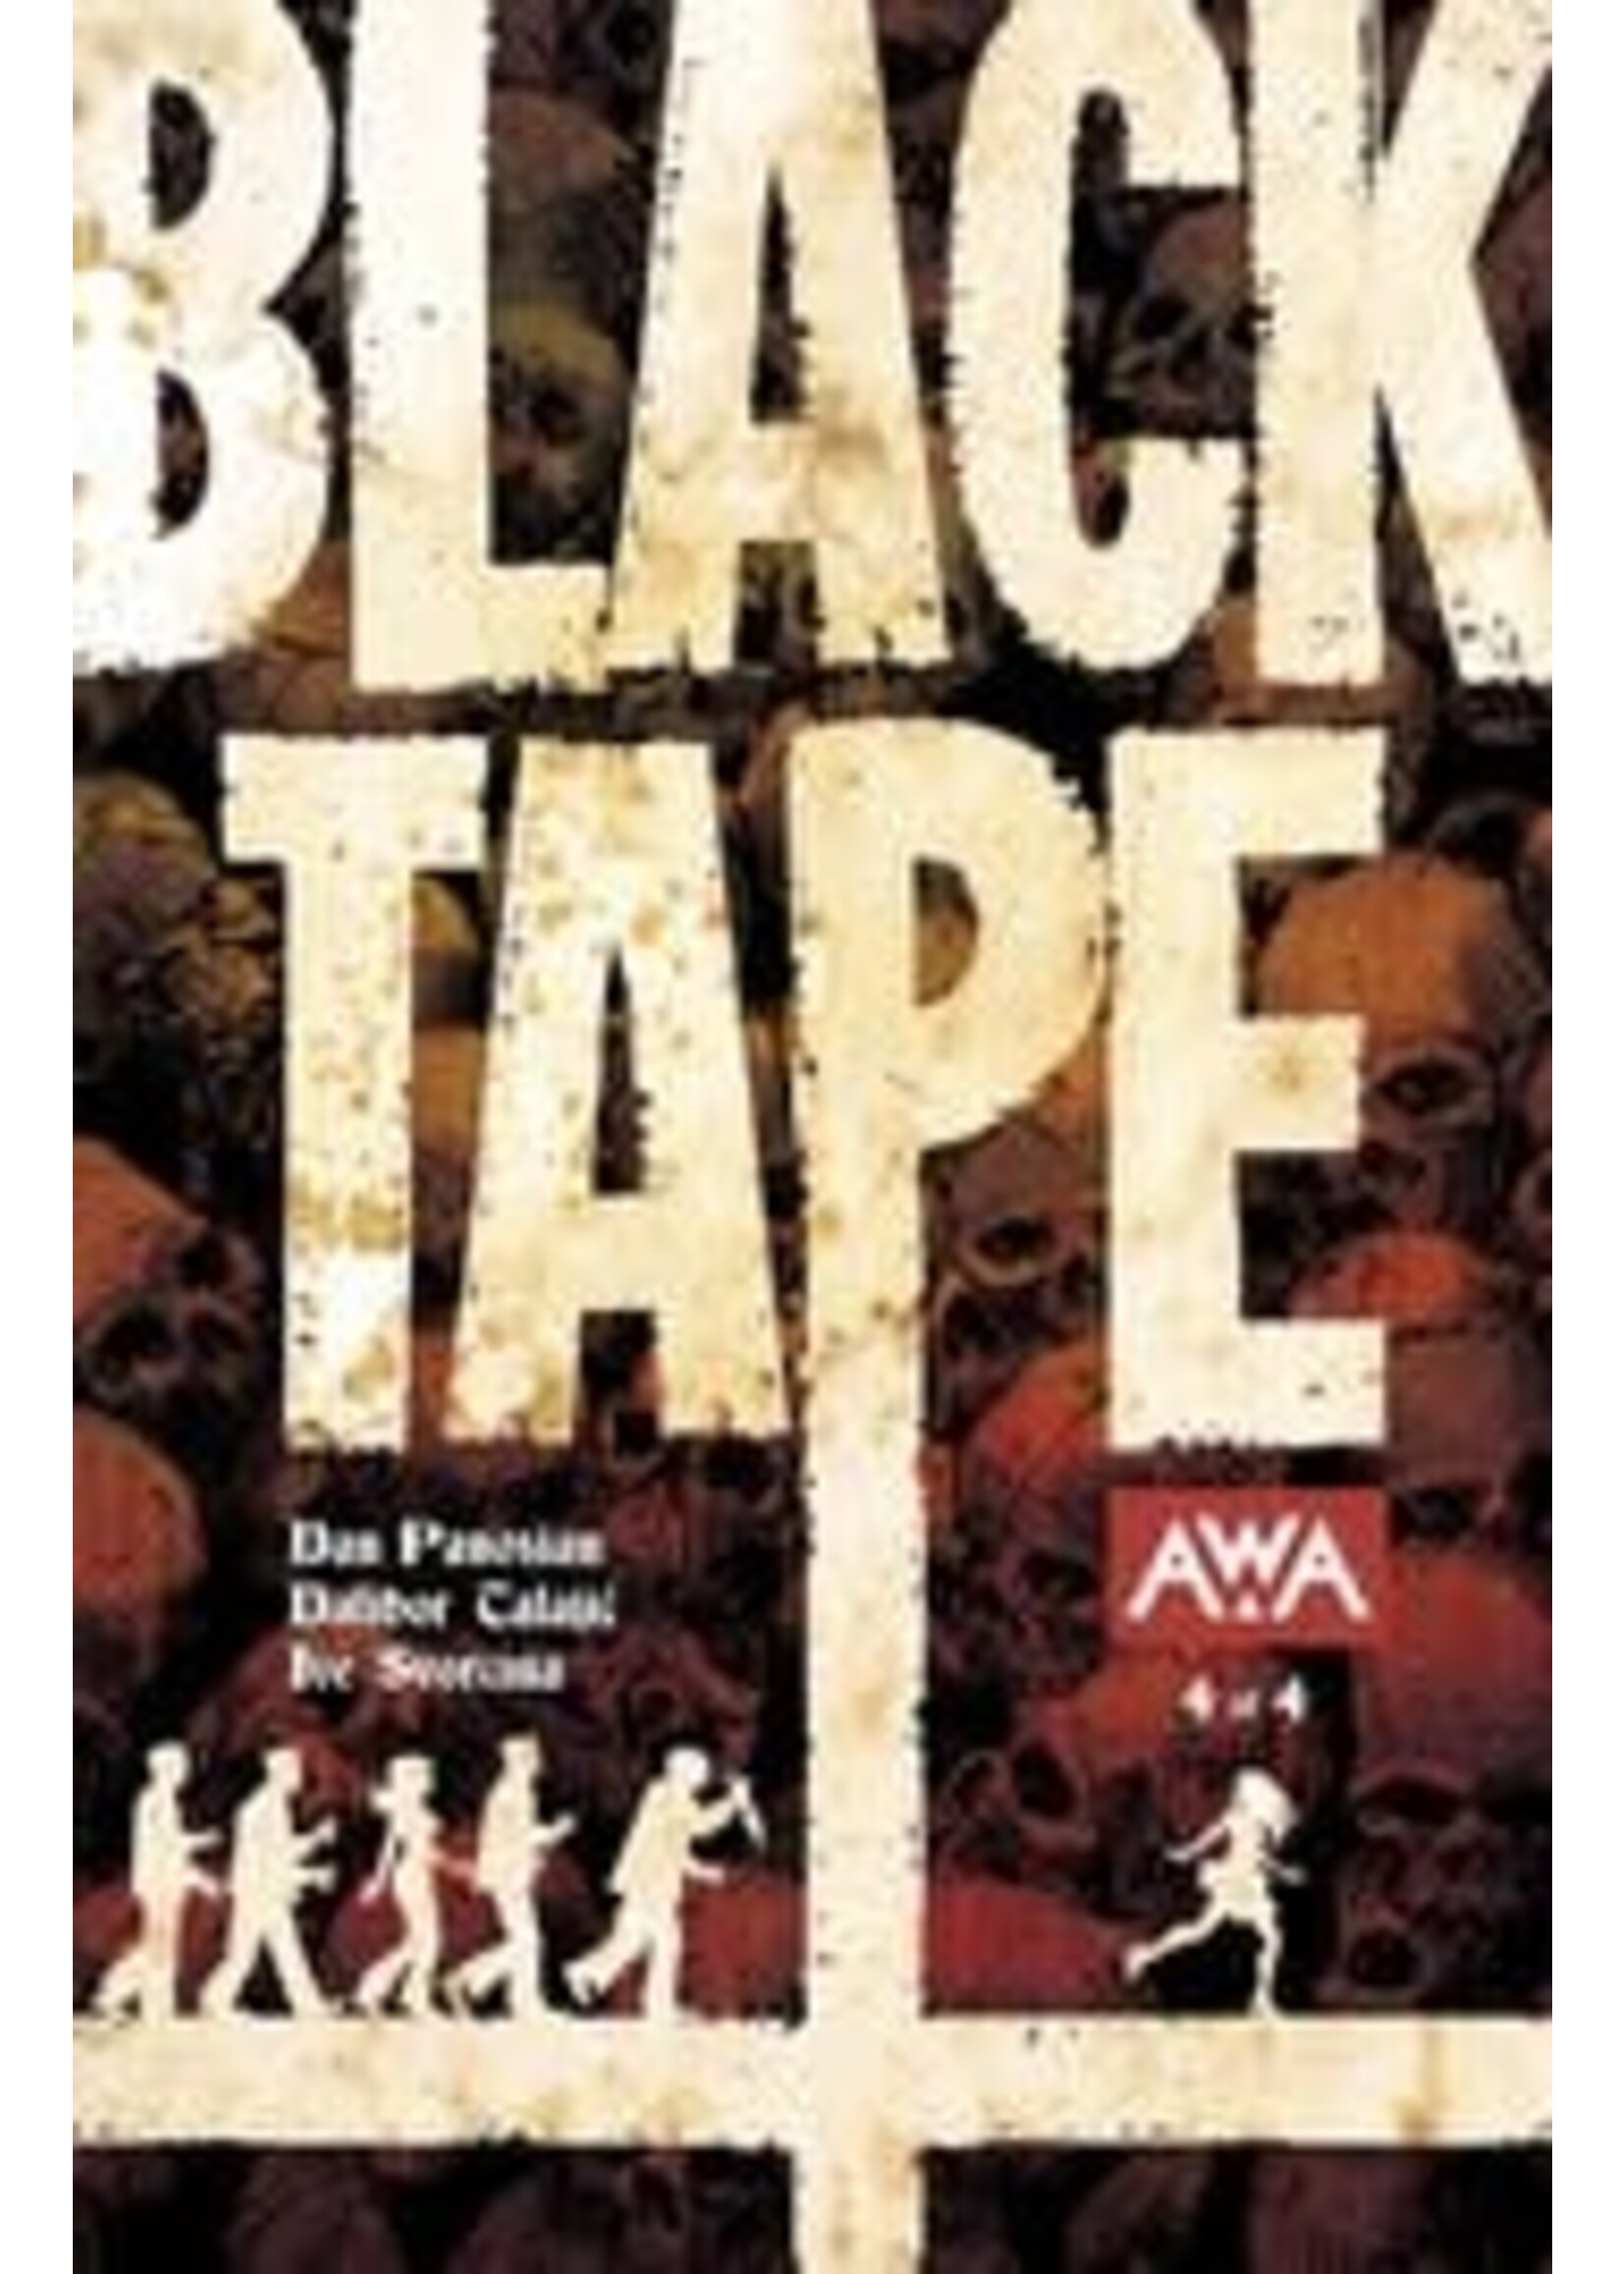 AWA STUDIOS BLACK TAPE complete 4 issue series